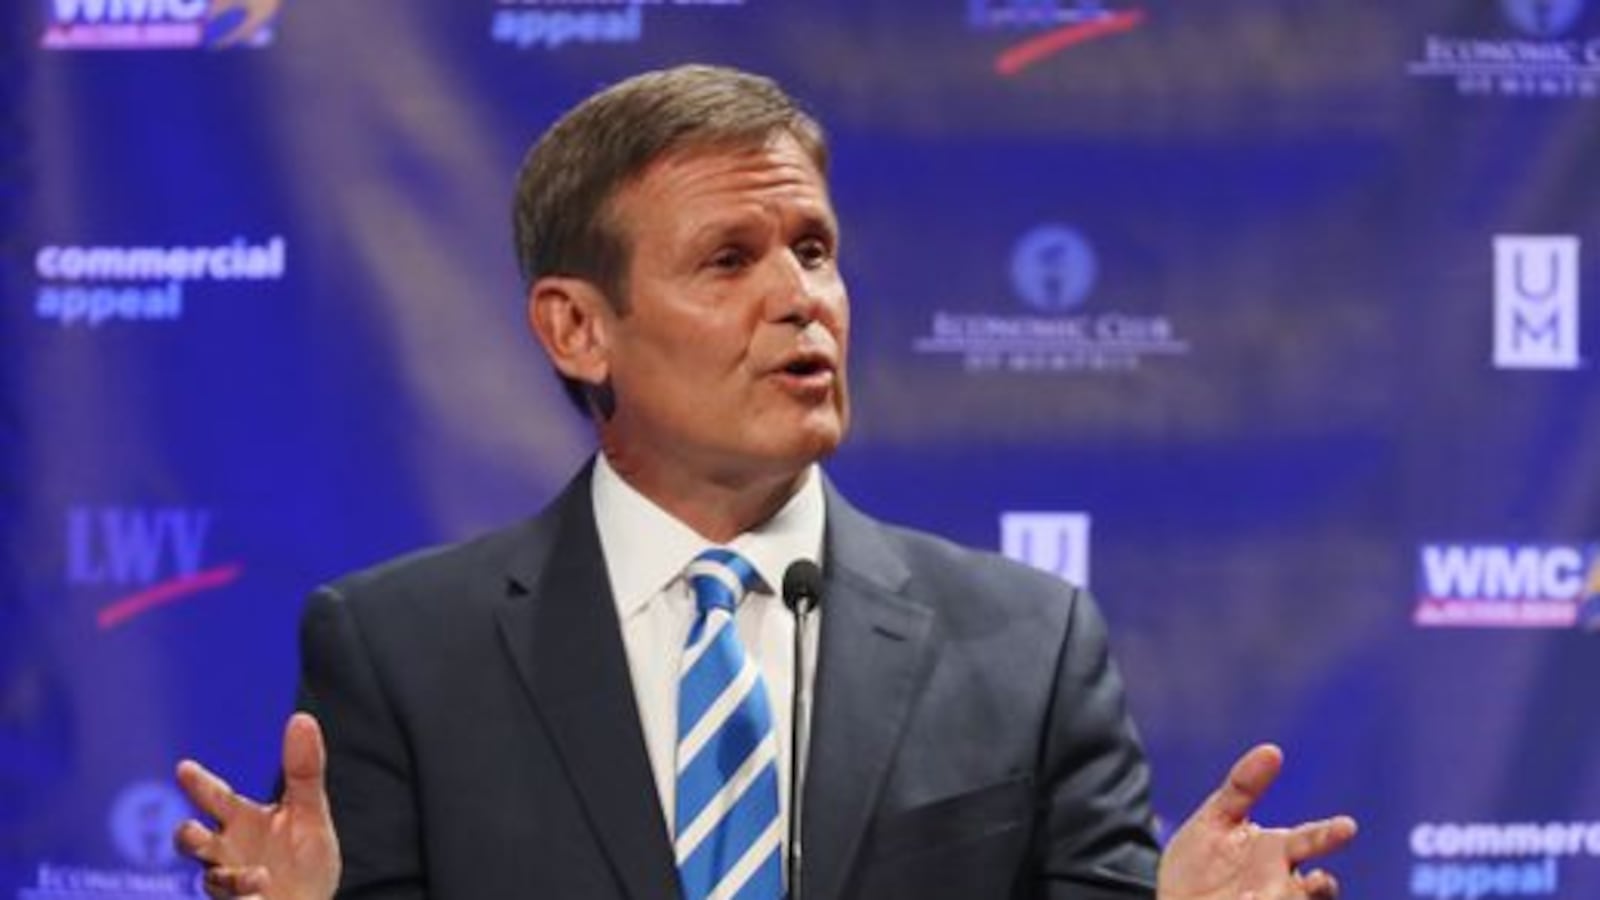 Republican Bill Lee speaks during an Oct. 3 gubernatorial debate in Memphis on the road to becoming Tennessee's next governor.